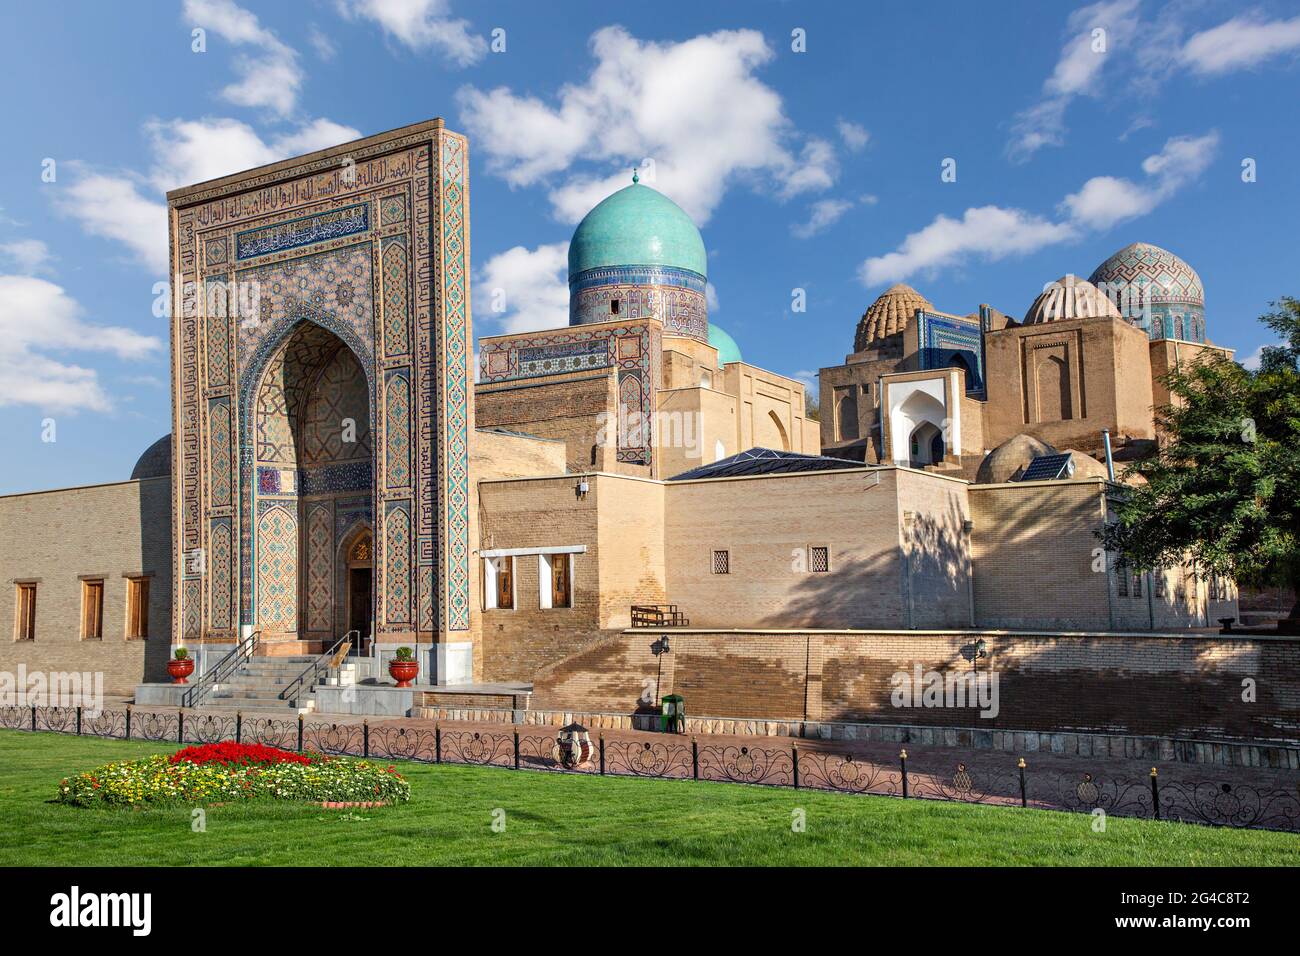 View over the mausoleums and domes of the historical cemetery of Shahi Zinda, Samarkand, Uzbekistan. Stock Photo